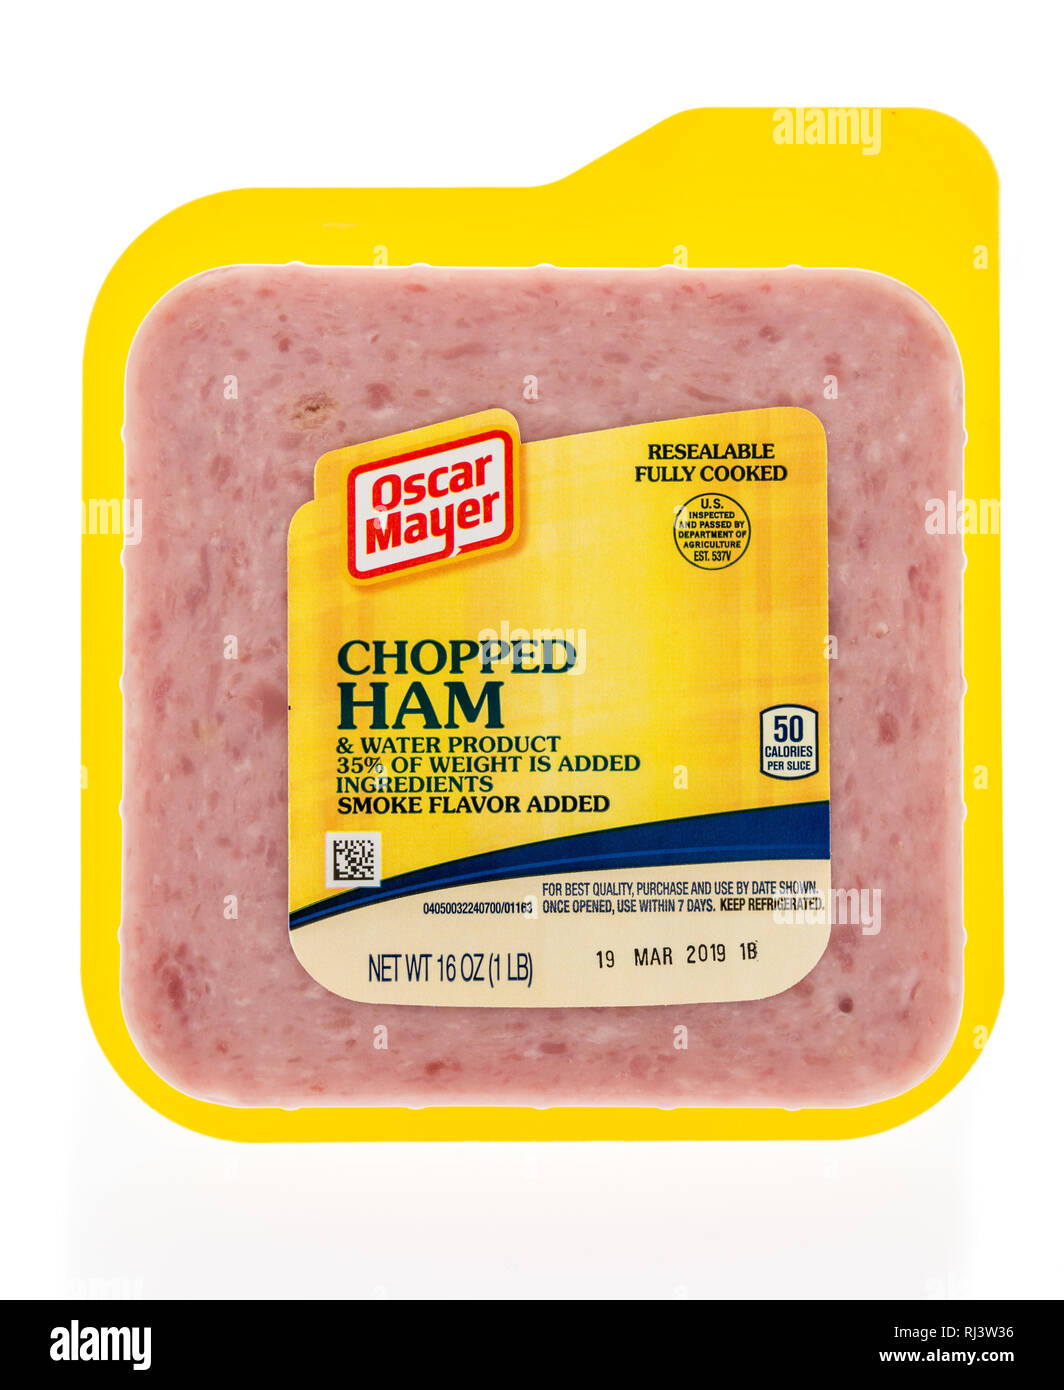 Winneconne, WI - 2 Feb 2019: A package of Oscar mayer chopped ham lunch meat on an isolated background Stock Photo